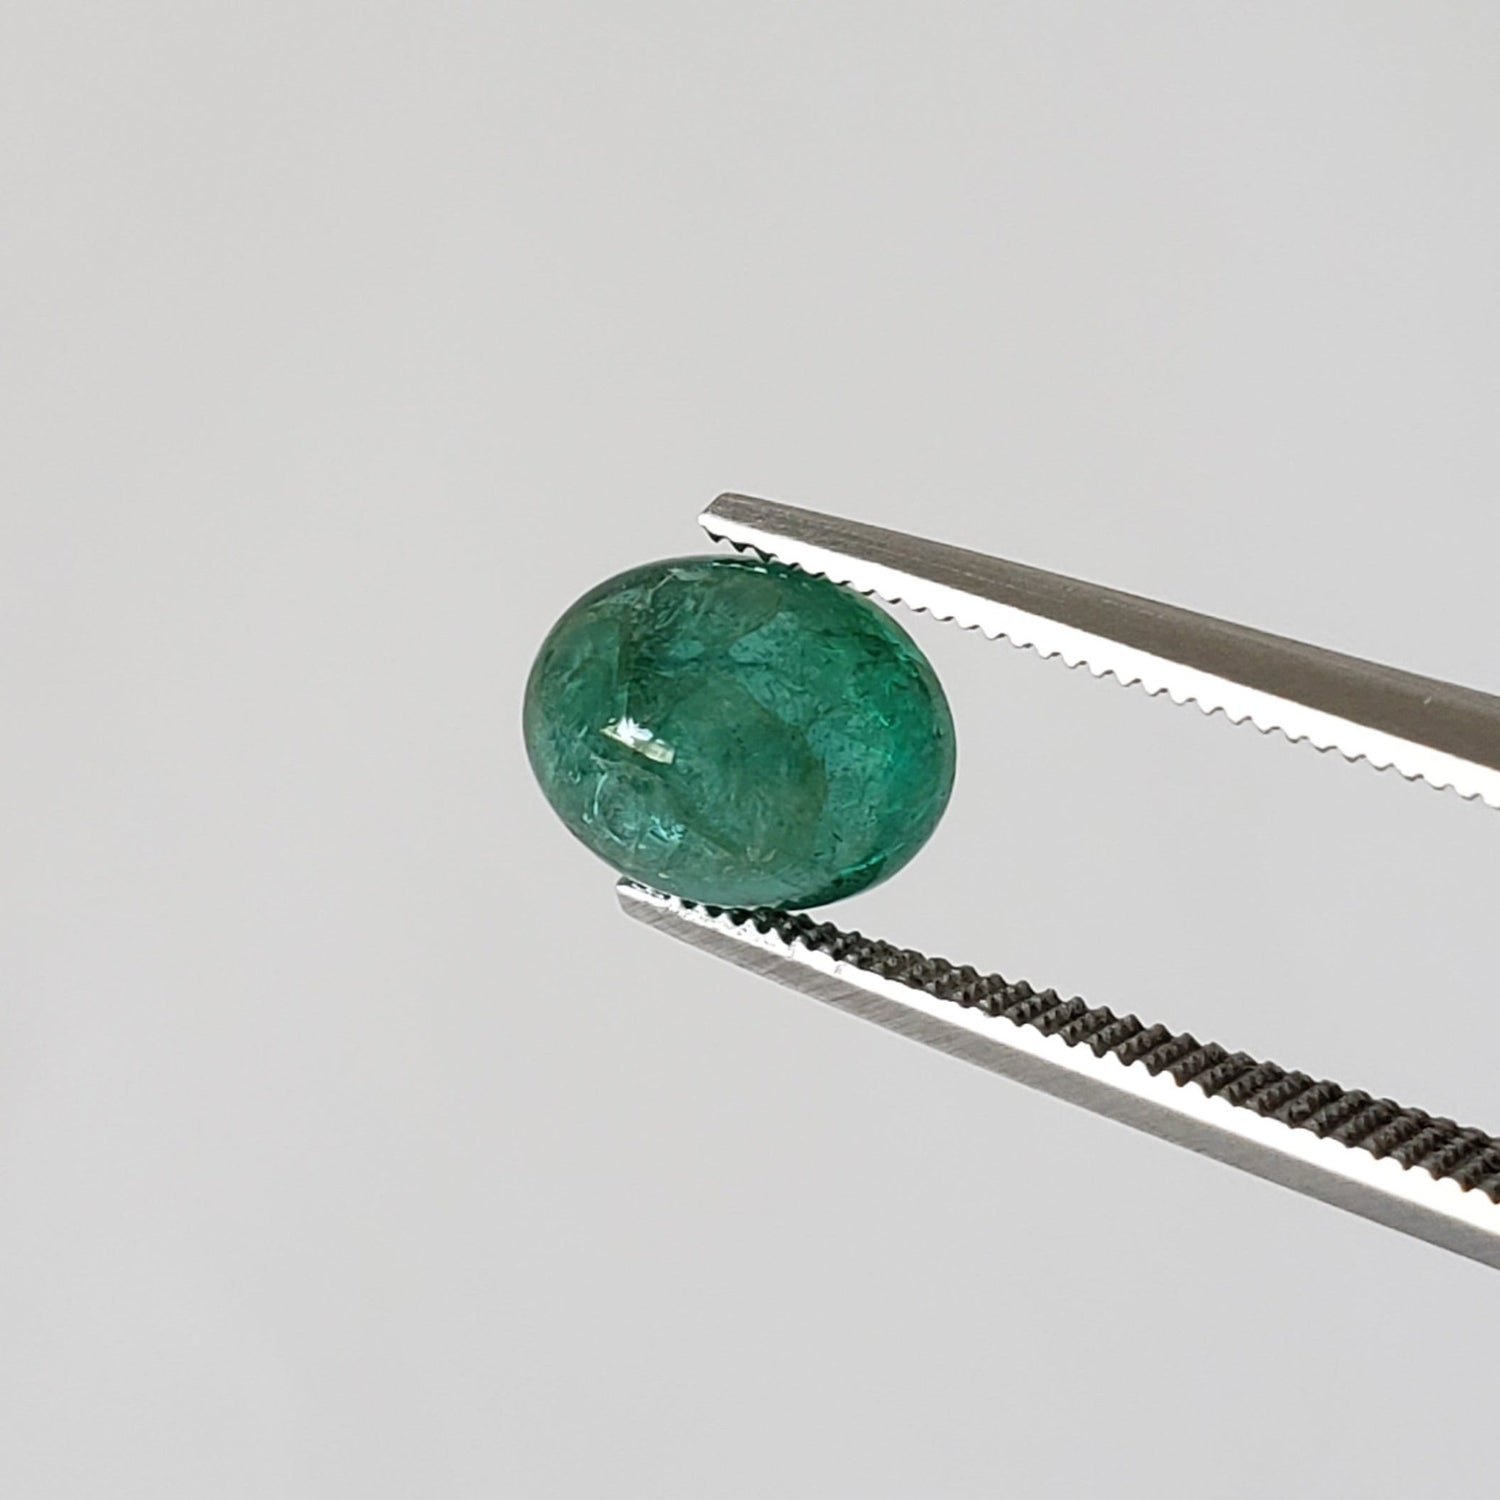 Emerald | Oval Cabochon | 8x6.5mm 1.73ct | Africa